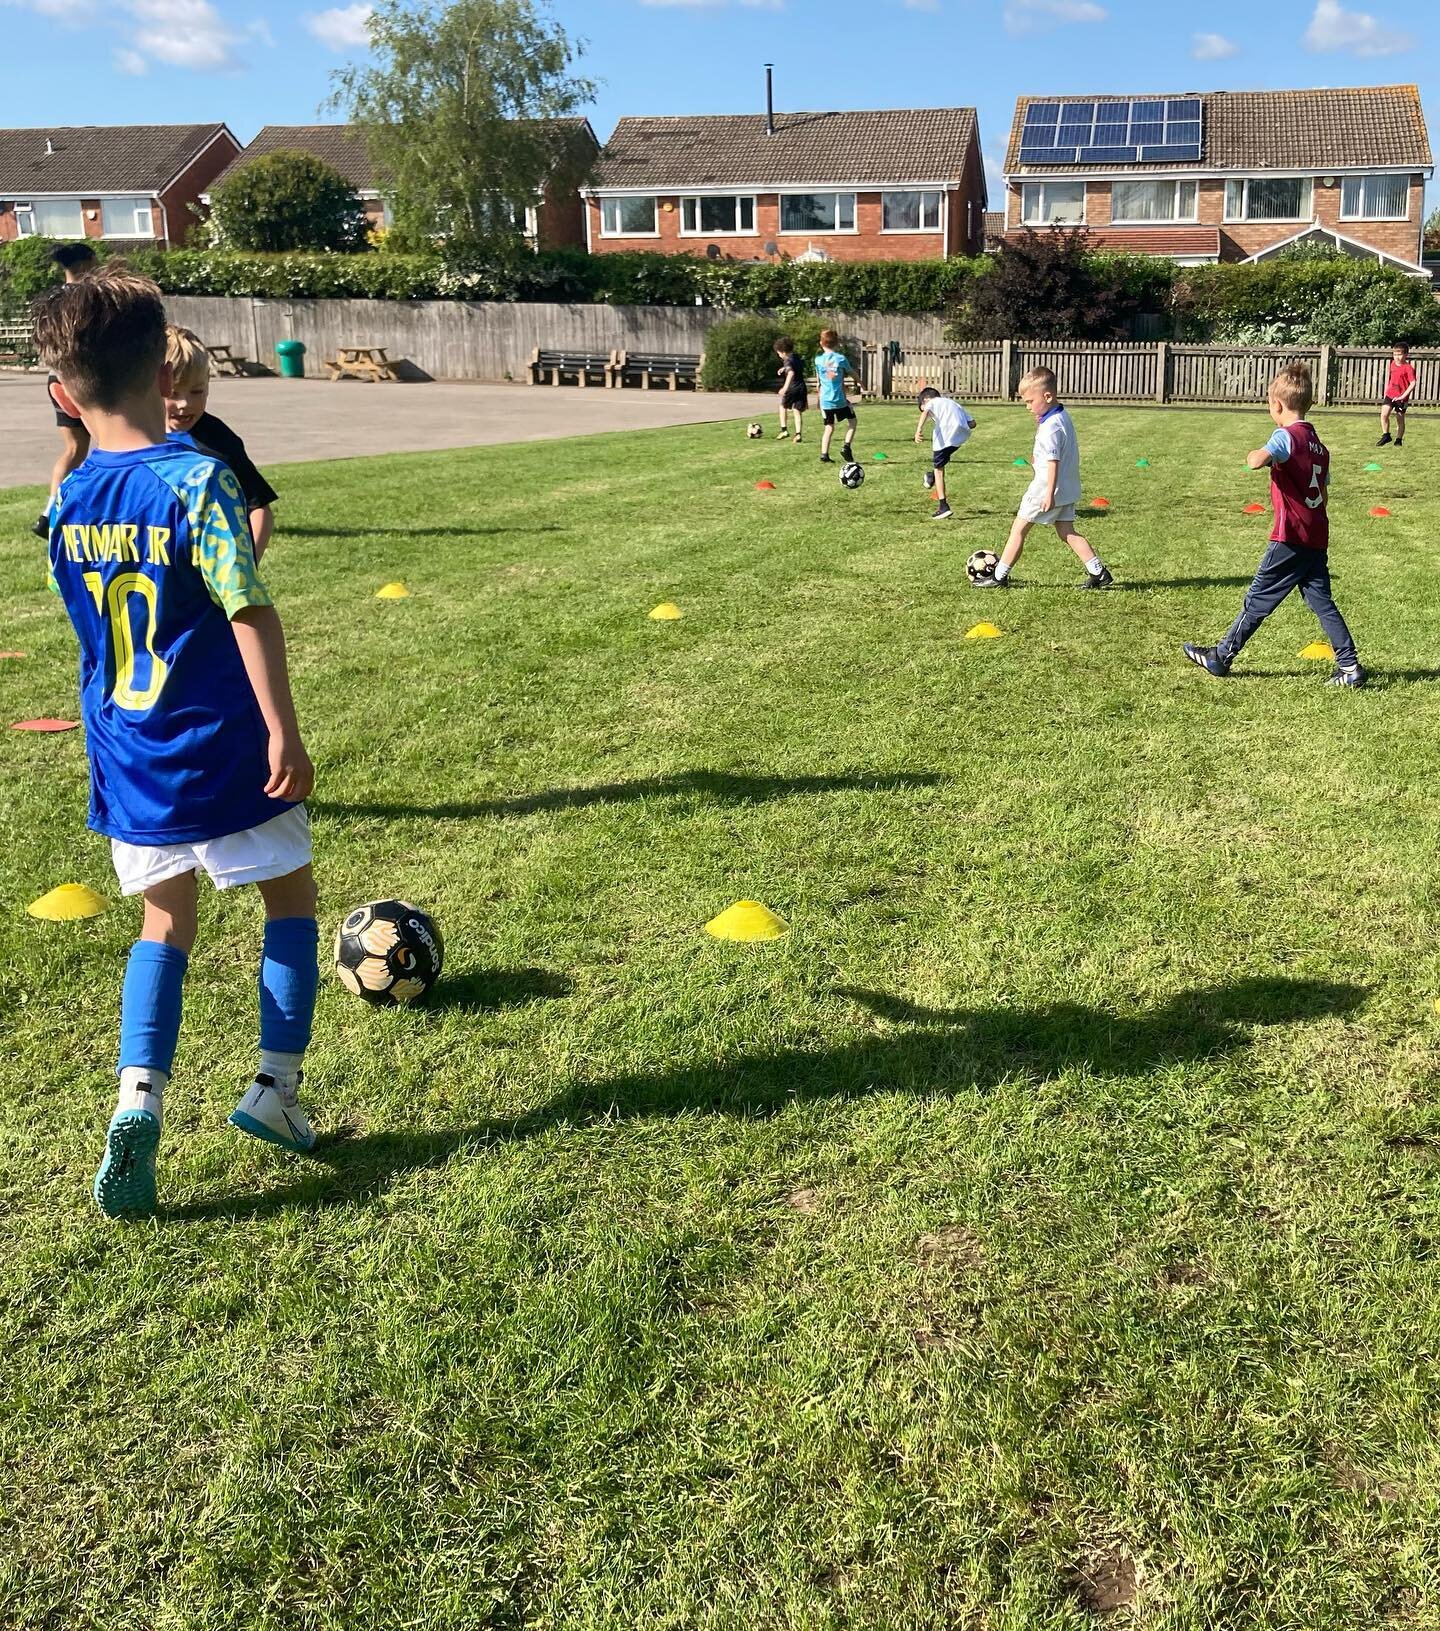 After a couple of bank holidays we were back with our year 1-3 group at @hollywoodpsuk and what a great session it was! 
Out in the sun we worked on lots of different skills and had loads of fun 🤩 😁
Well done lads!

#FootballFUNatics #Football #Fun